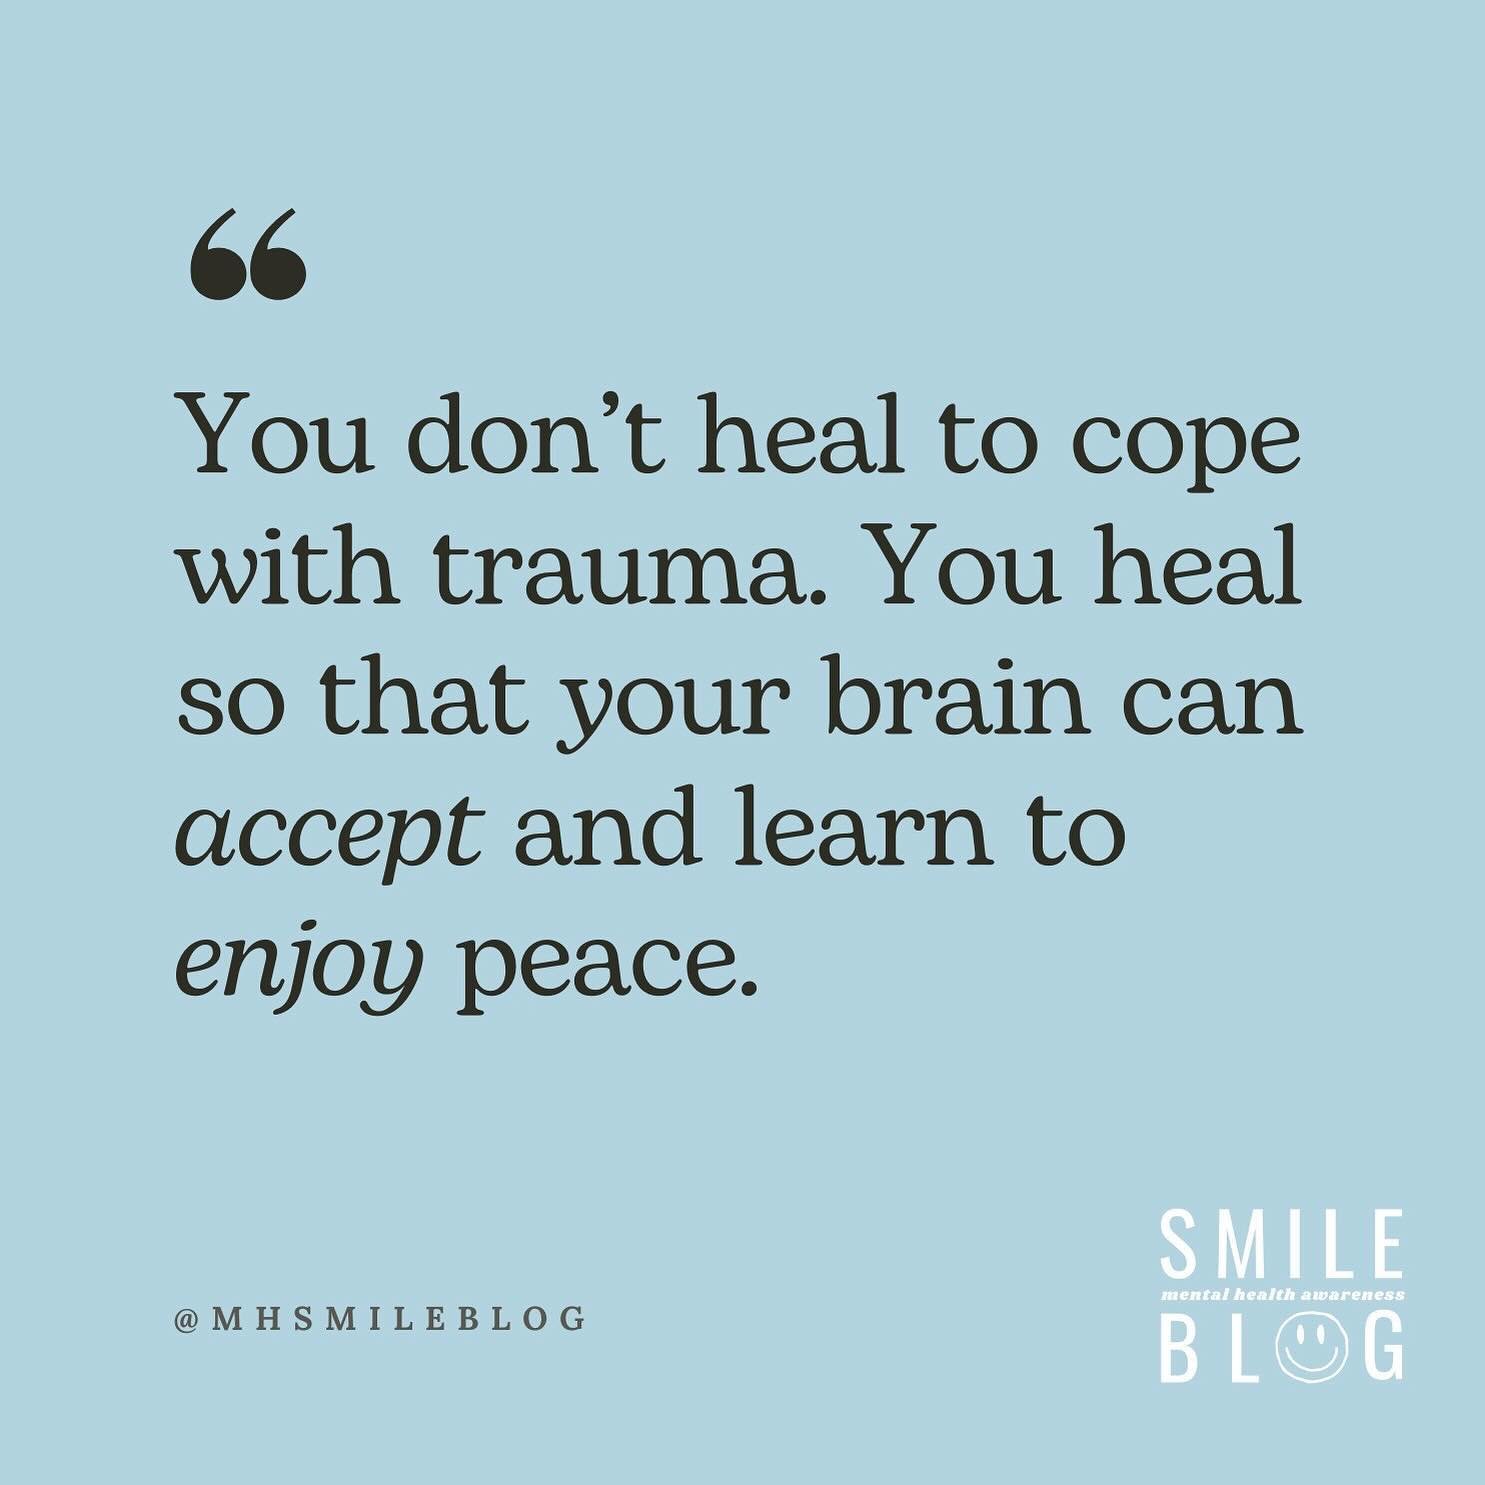 Part of healing is learning to tolerate what was once intolerable. Being okay is tolerating those emotions and choosing peace. Just because you choose your own peace doesn&rsquo;t mean you are ignoring the trauma, rather growing and separating yourse